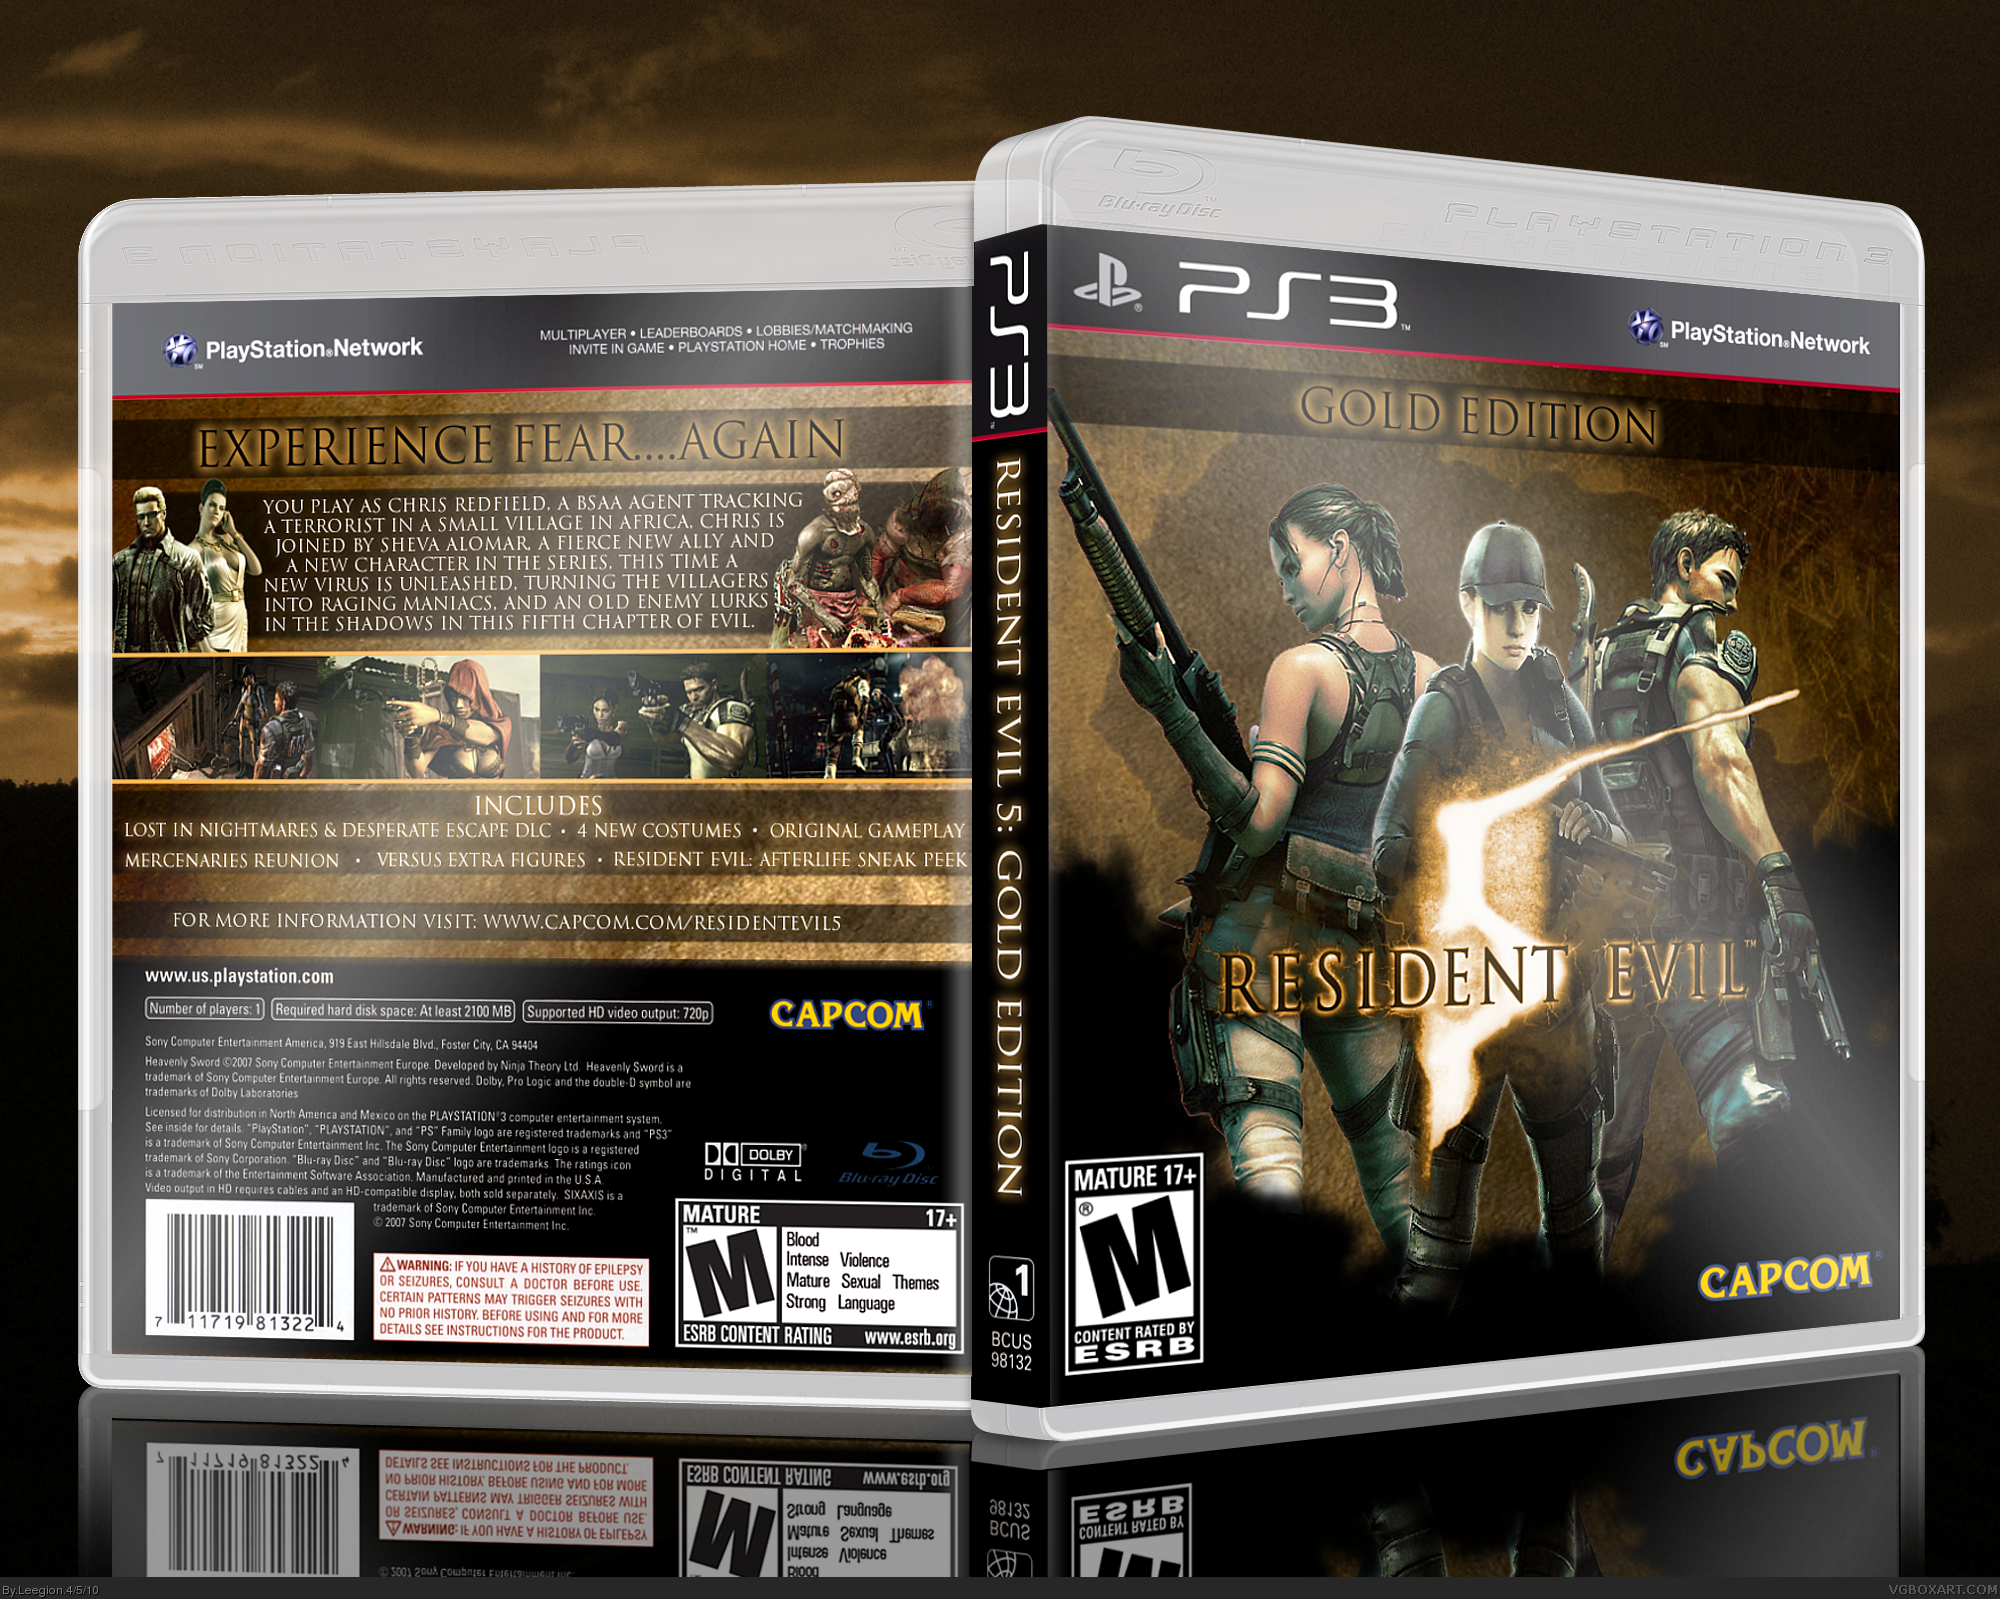 Resident Evil 5 Gold Edition ps3. Диск Resident Evil Gold Edition. Resident Evil 5 ps3 обложка. Resident Evil 5 Gold Edition ps3 Disc. Код игры resident